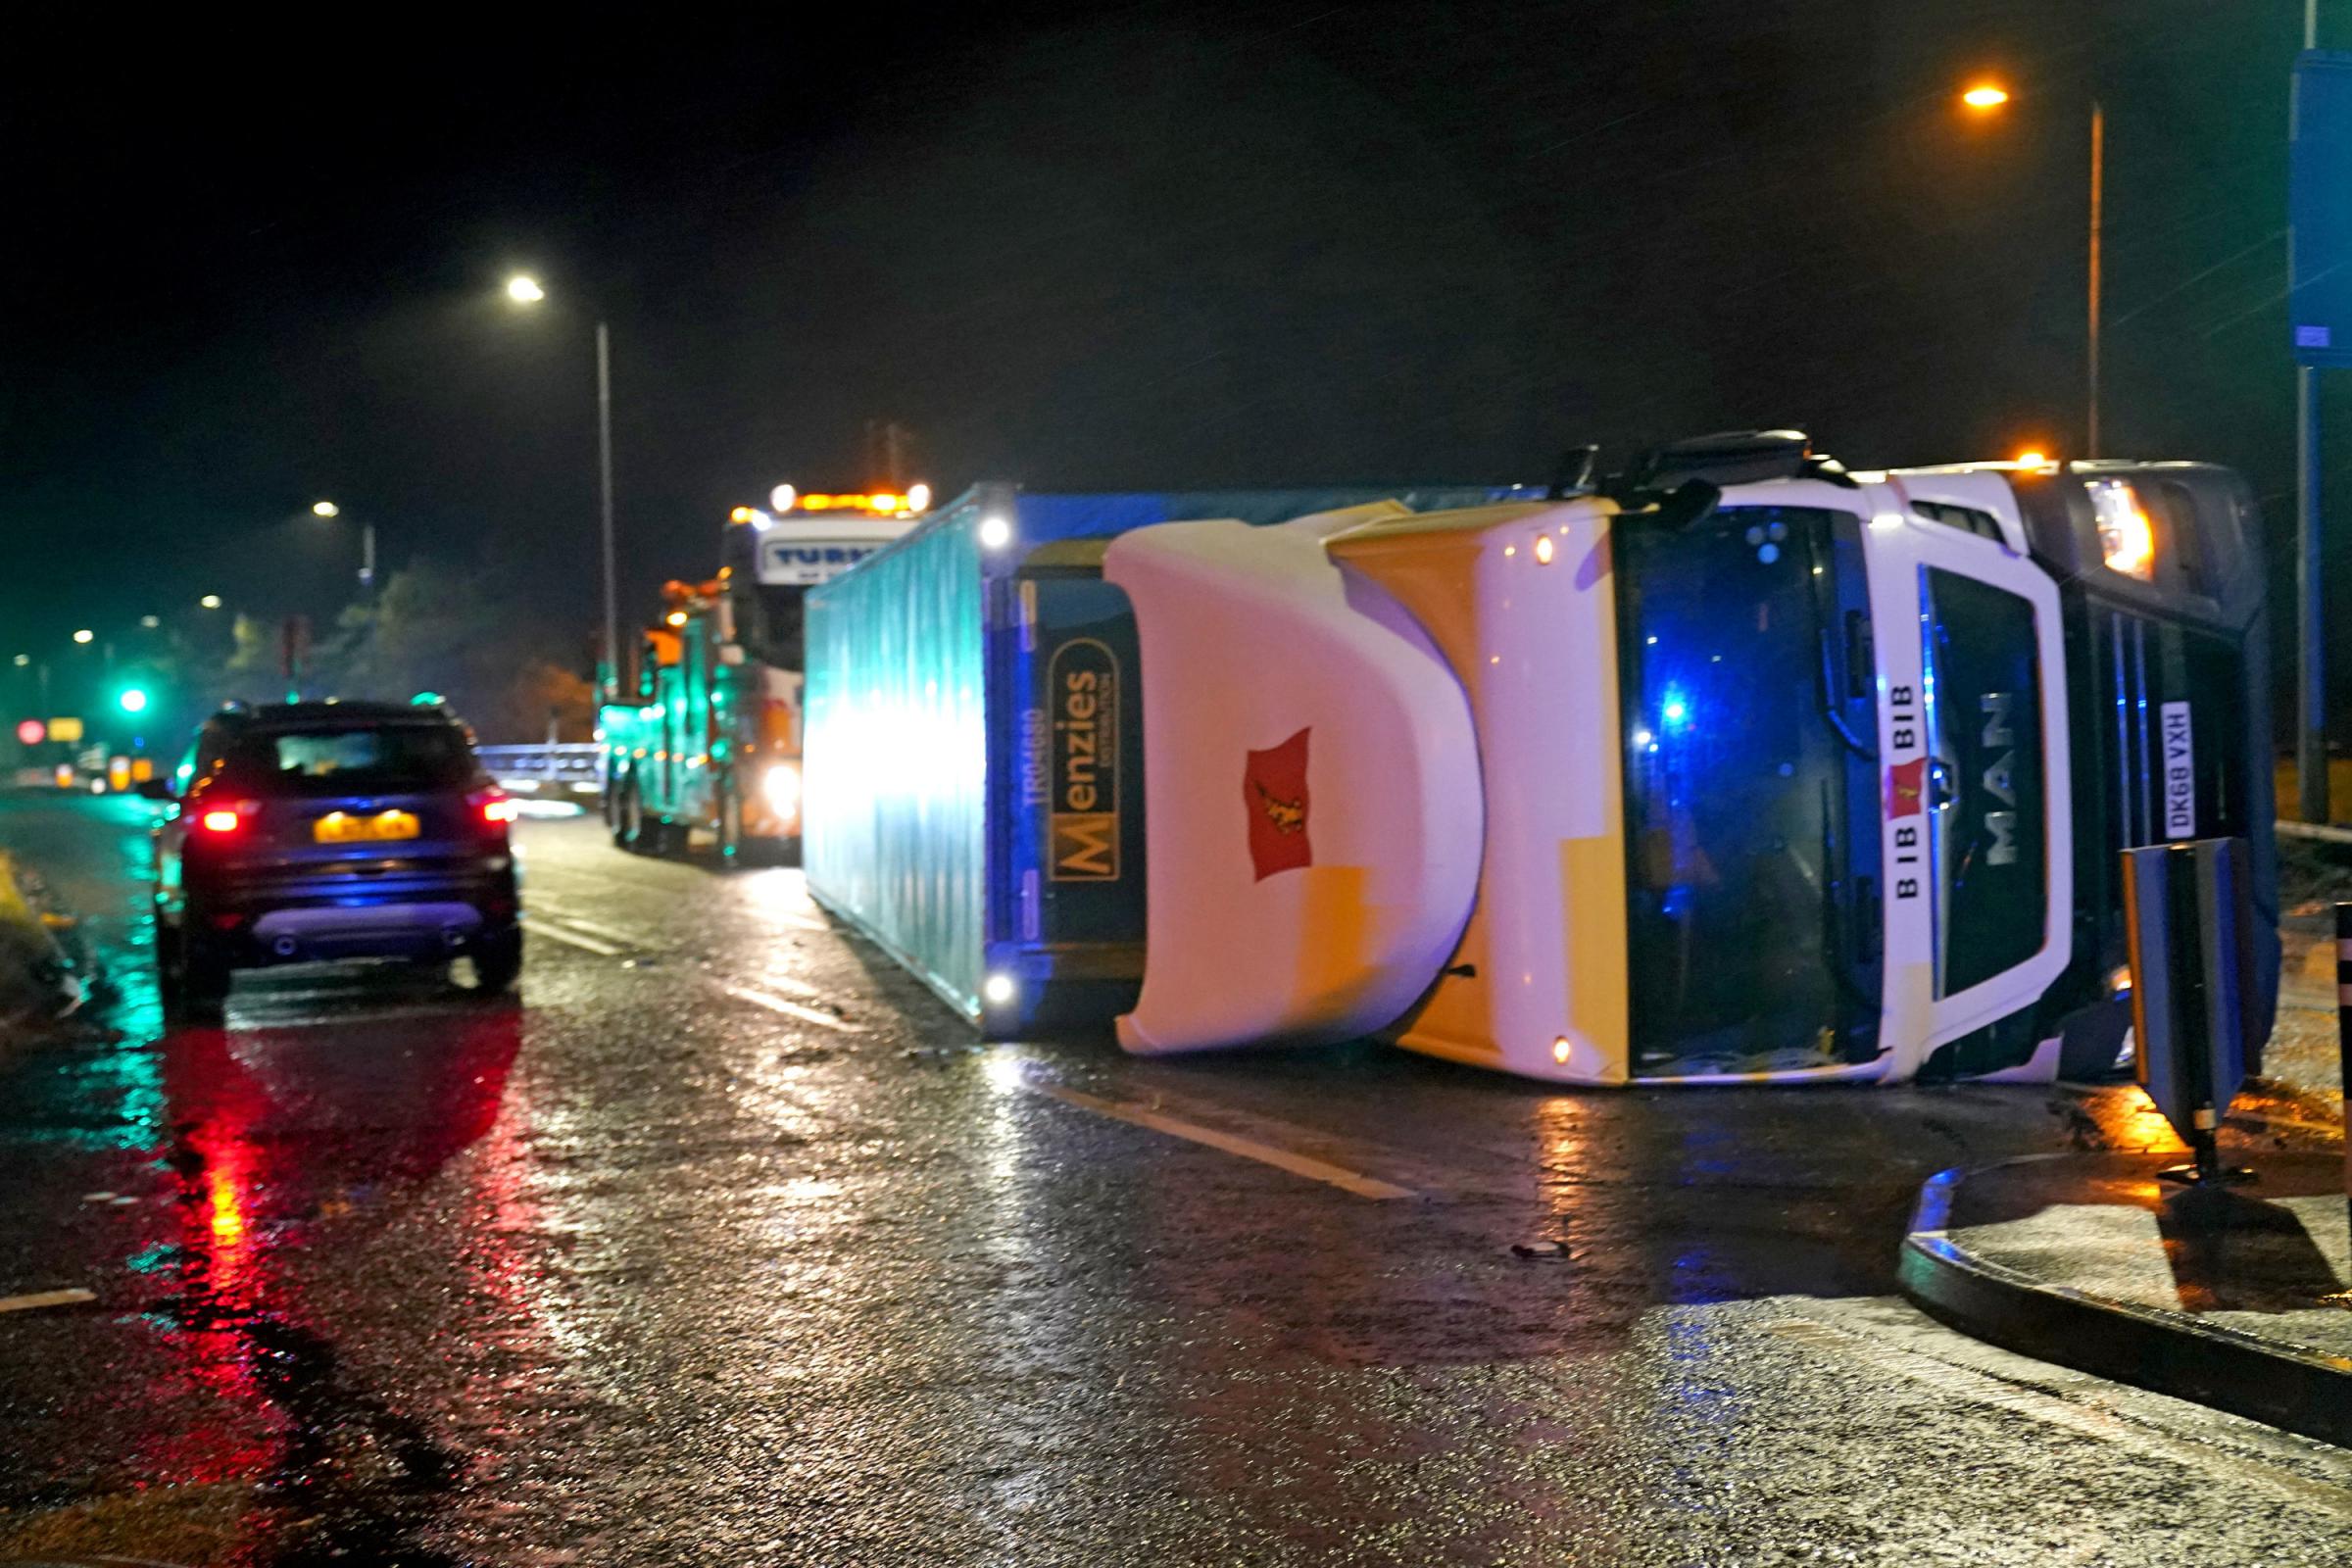 A lorry blown over in high winds blocks the A179 near Hartlepool, County Durham, after gusts of almost 100 miles per hour battered some areas of the UK during Storm Arwen. Picture date: Saturday November 27, 2021. PA Photo. The Met Office issued a rare